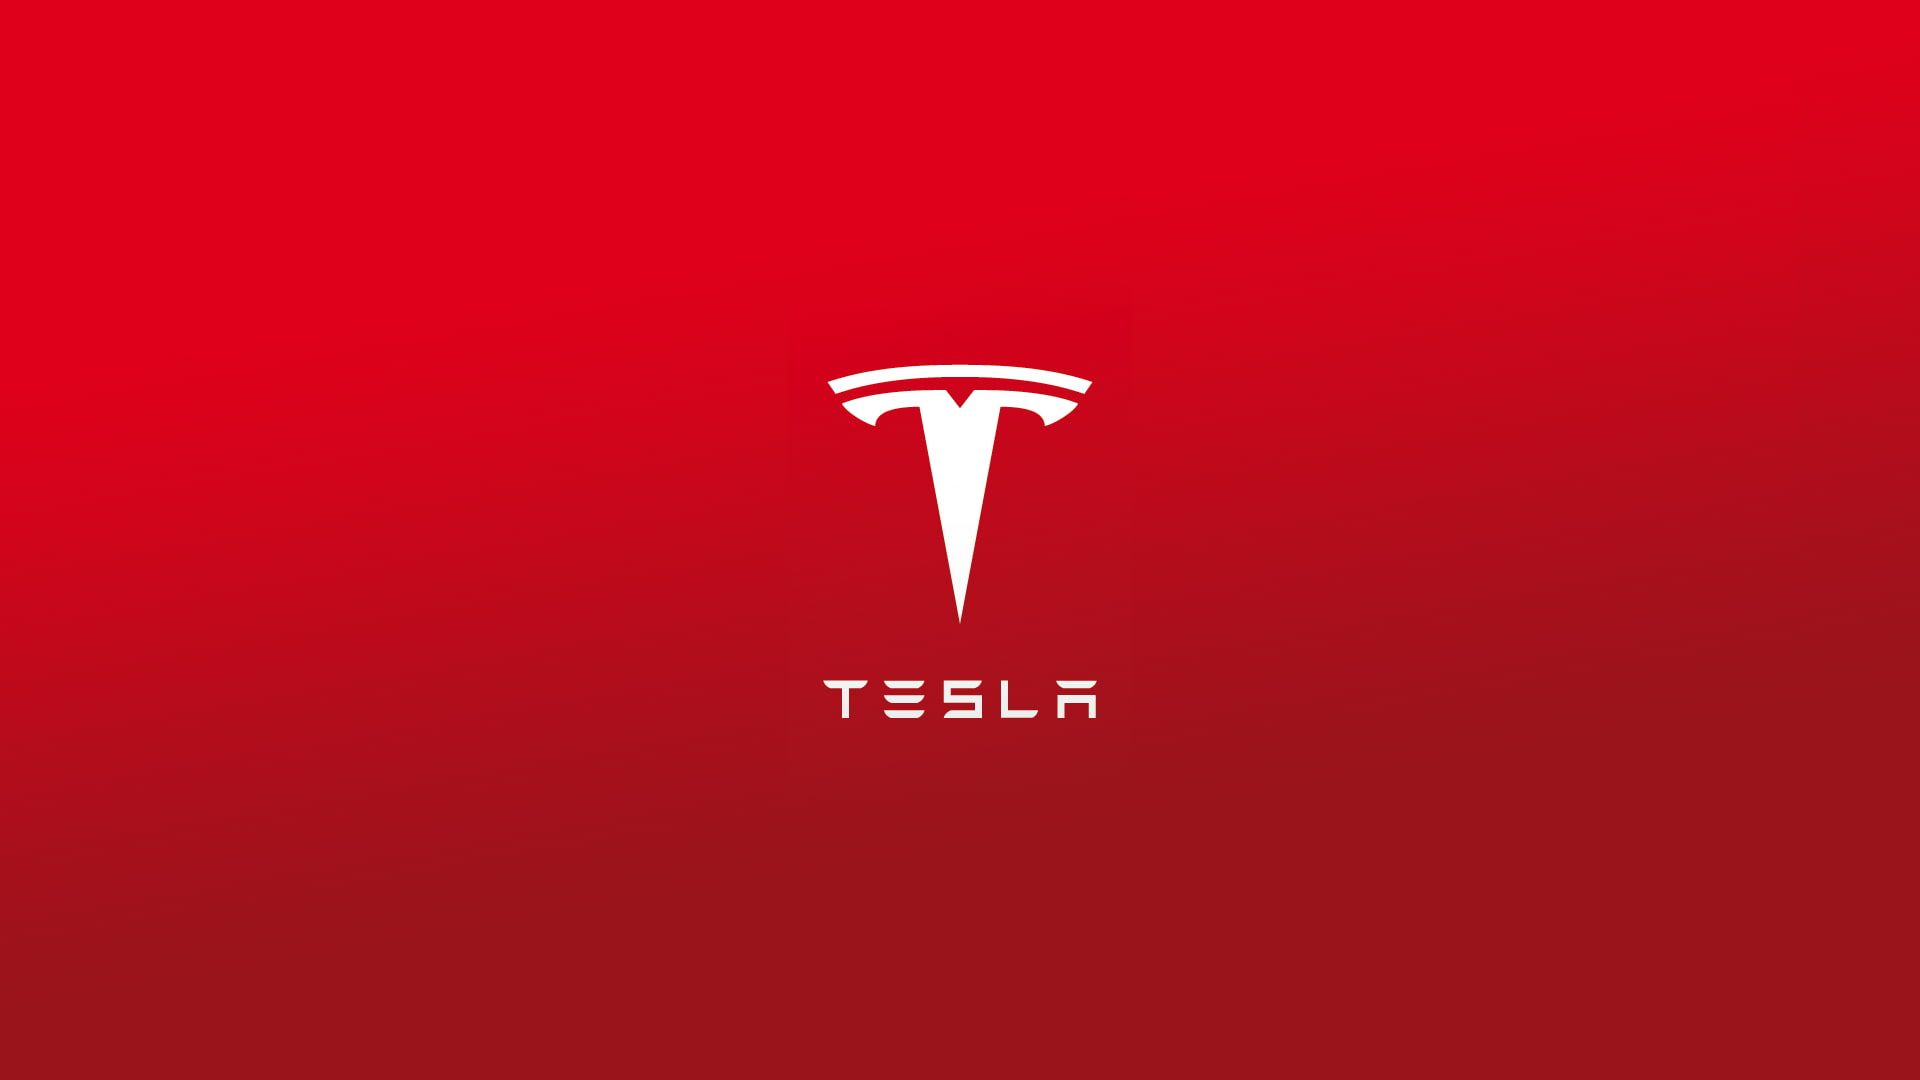 Tesla's India entry to boost domestic EV market, say experts